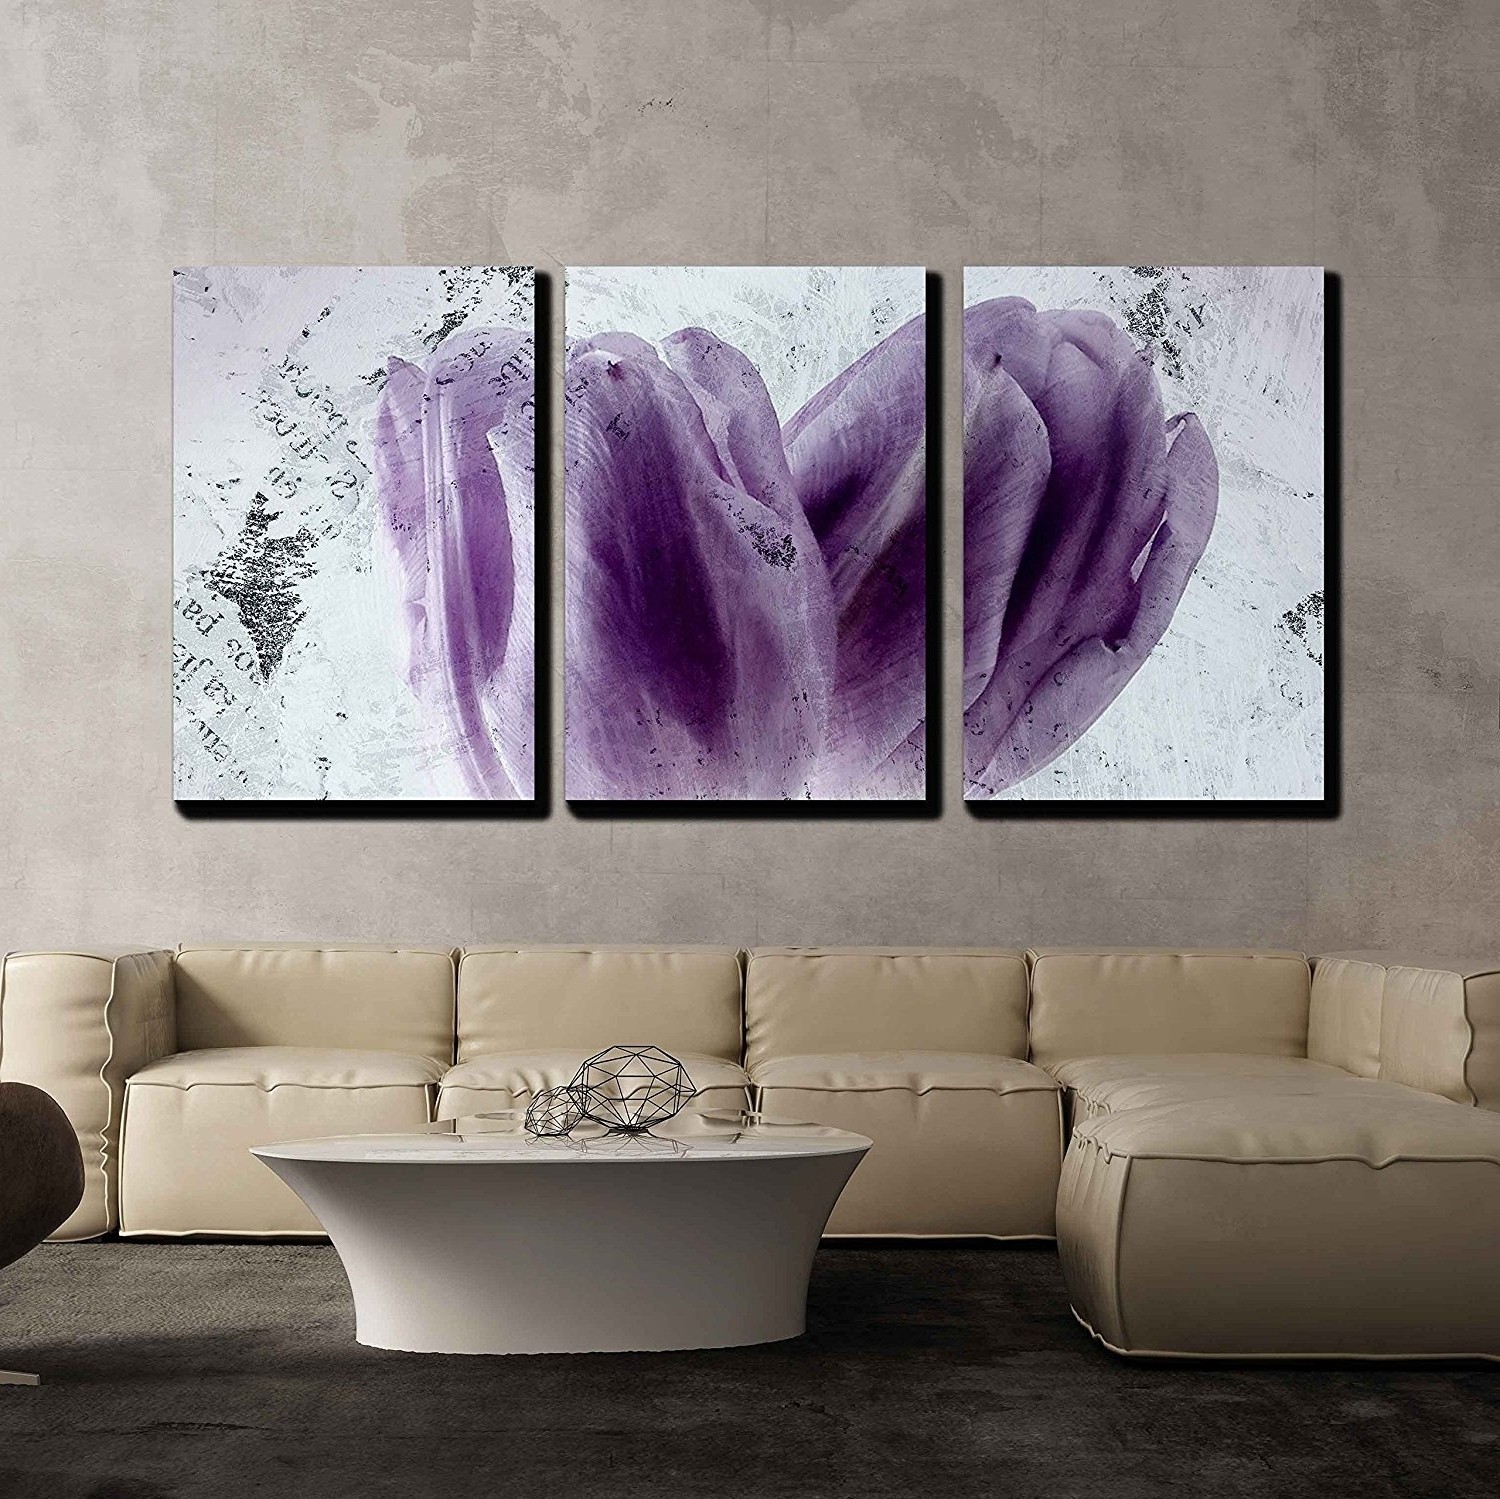 15 collection of purple flowers canvas wall art 1